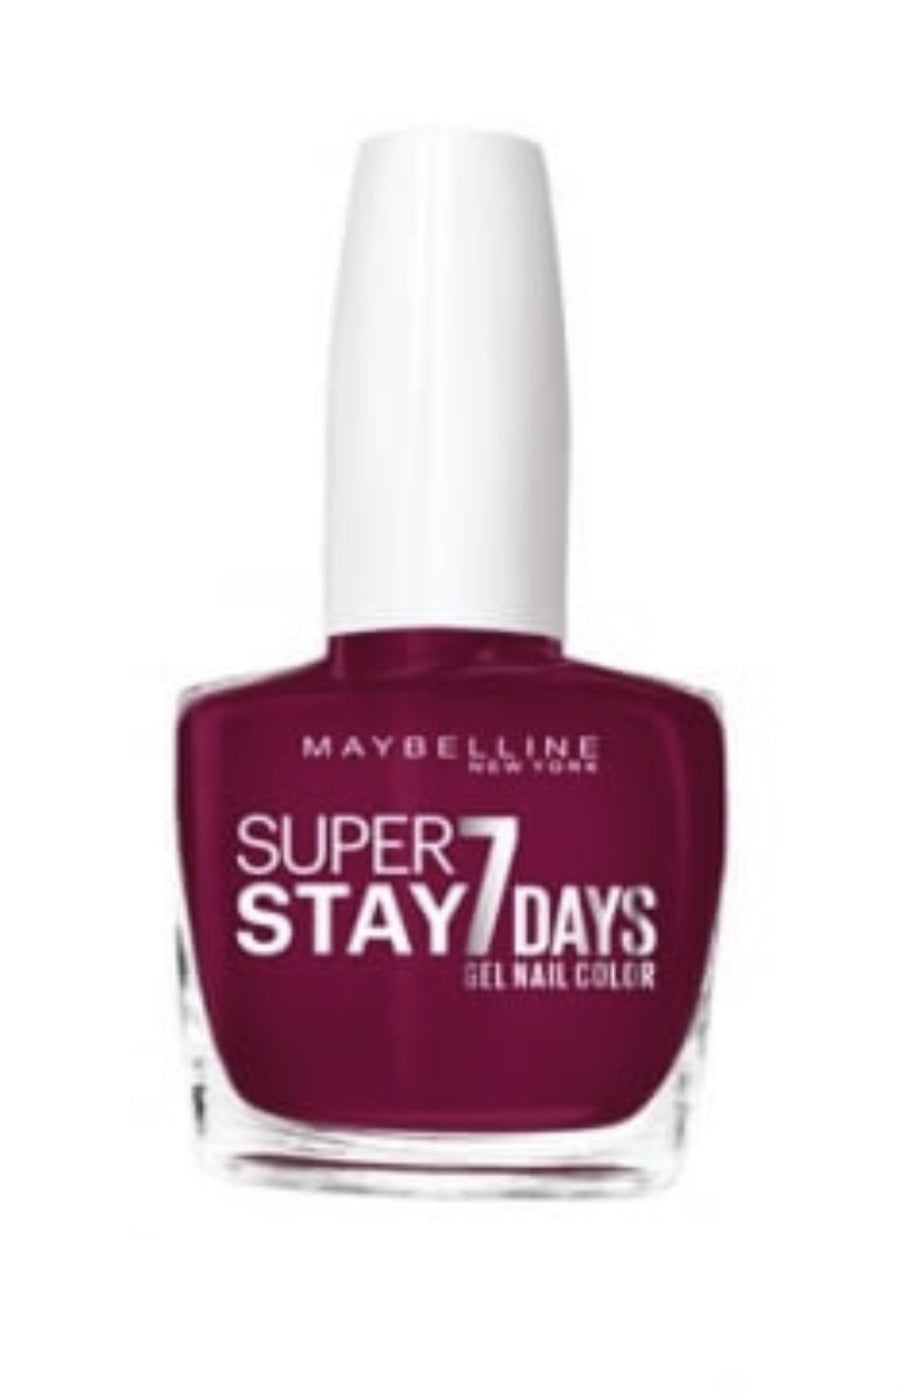 MAYBELLINE SUPER STAY 7 DAYS GEL NAIL 778 SABLE ROSE / ROSY SAND 10 ml -  Cosmetics & Co